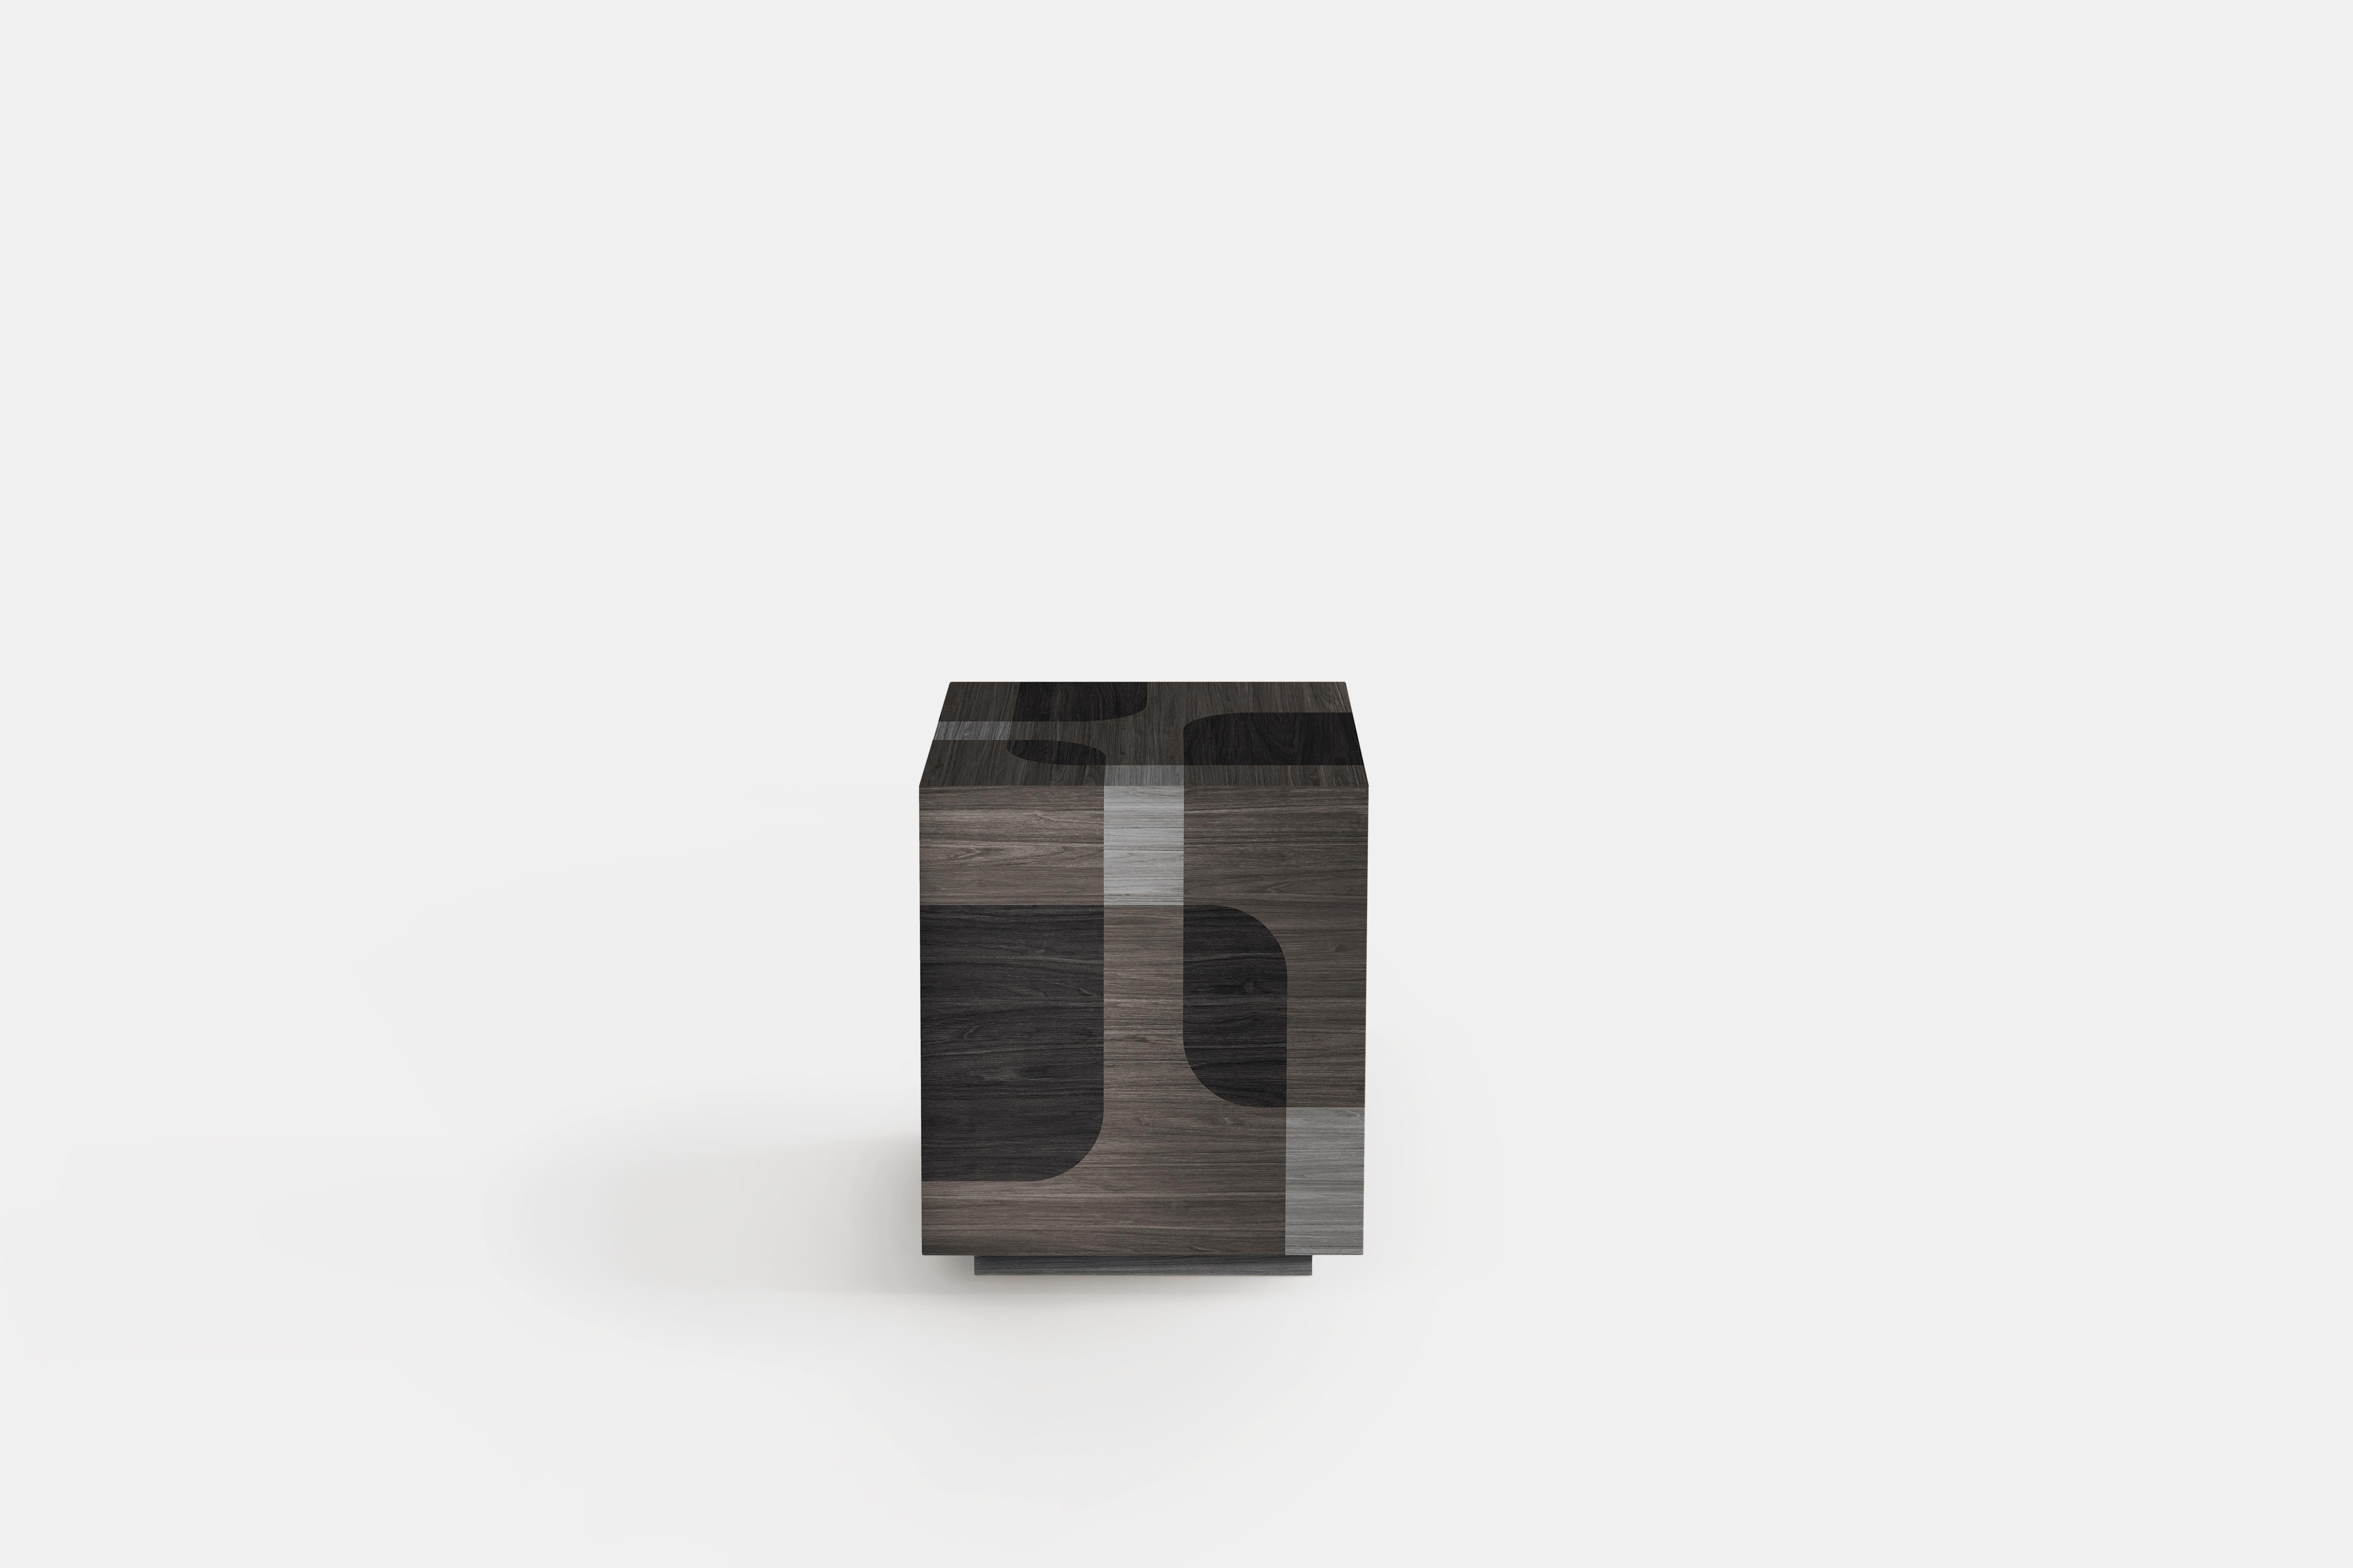 2 Bodega Night Stands and 1 Coffee Table in Black Wood Marquetry, Joel Escalona (Sperrholz) im Angebot